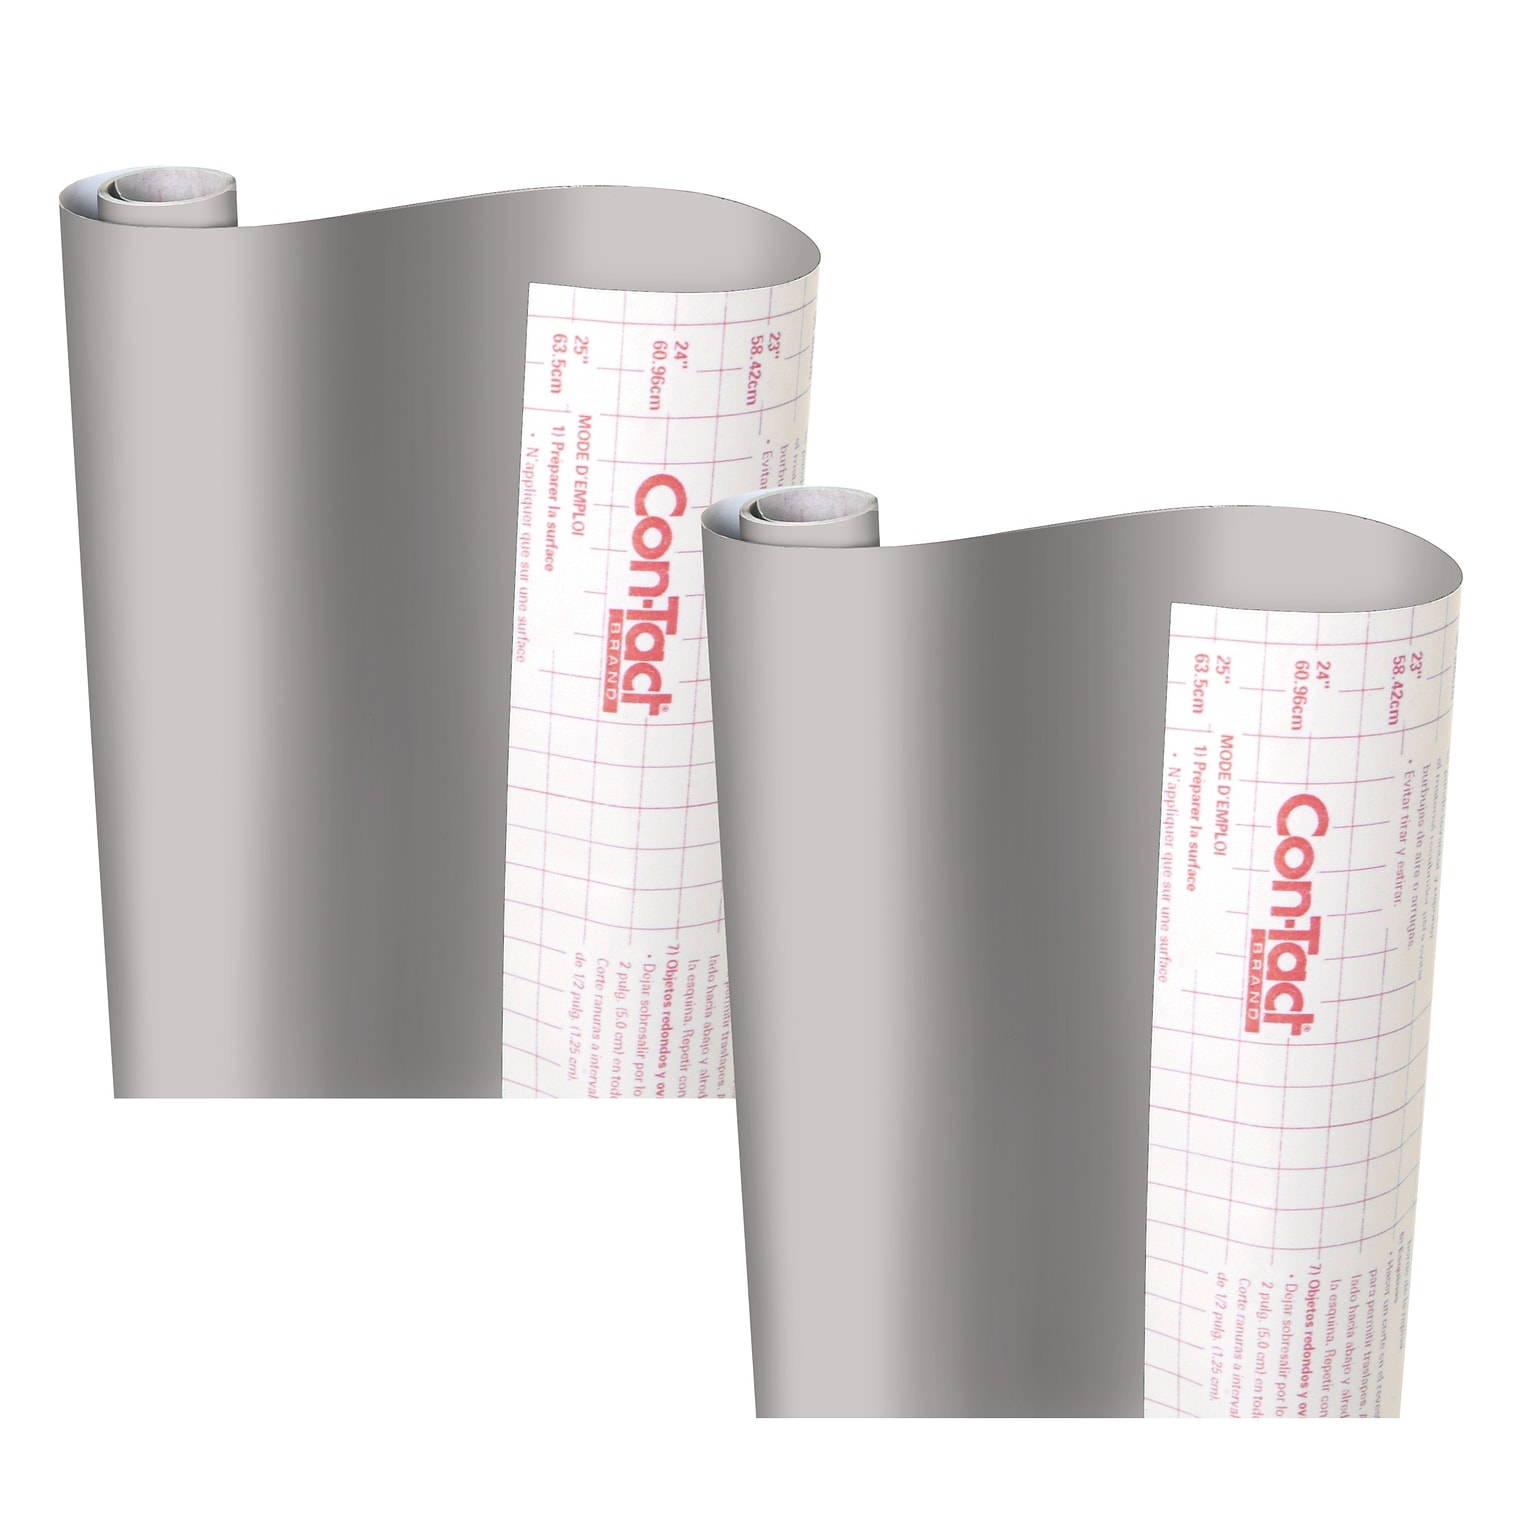 Con-Tact Creative Covering™ Adhesive Covering, 18 x 16 Per Roll, Slate Gray, 2 Rolls (KIT16FC9AA2206-2)